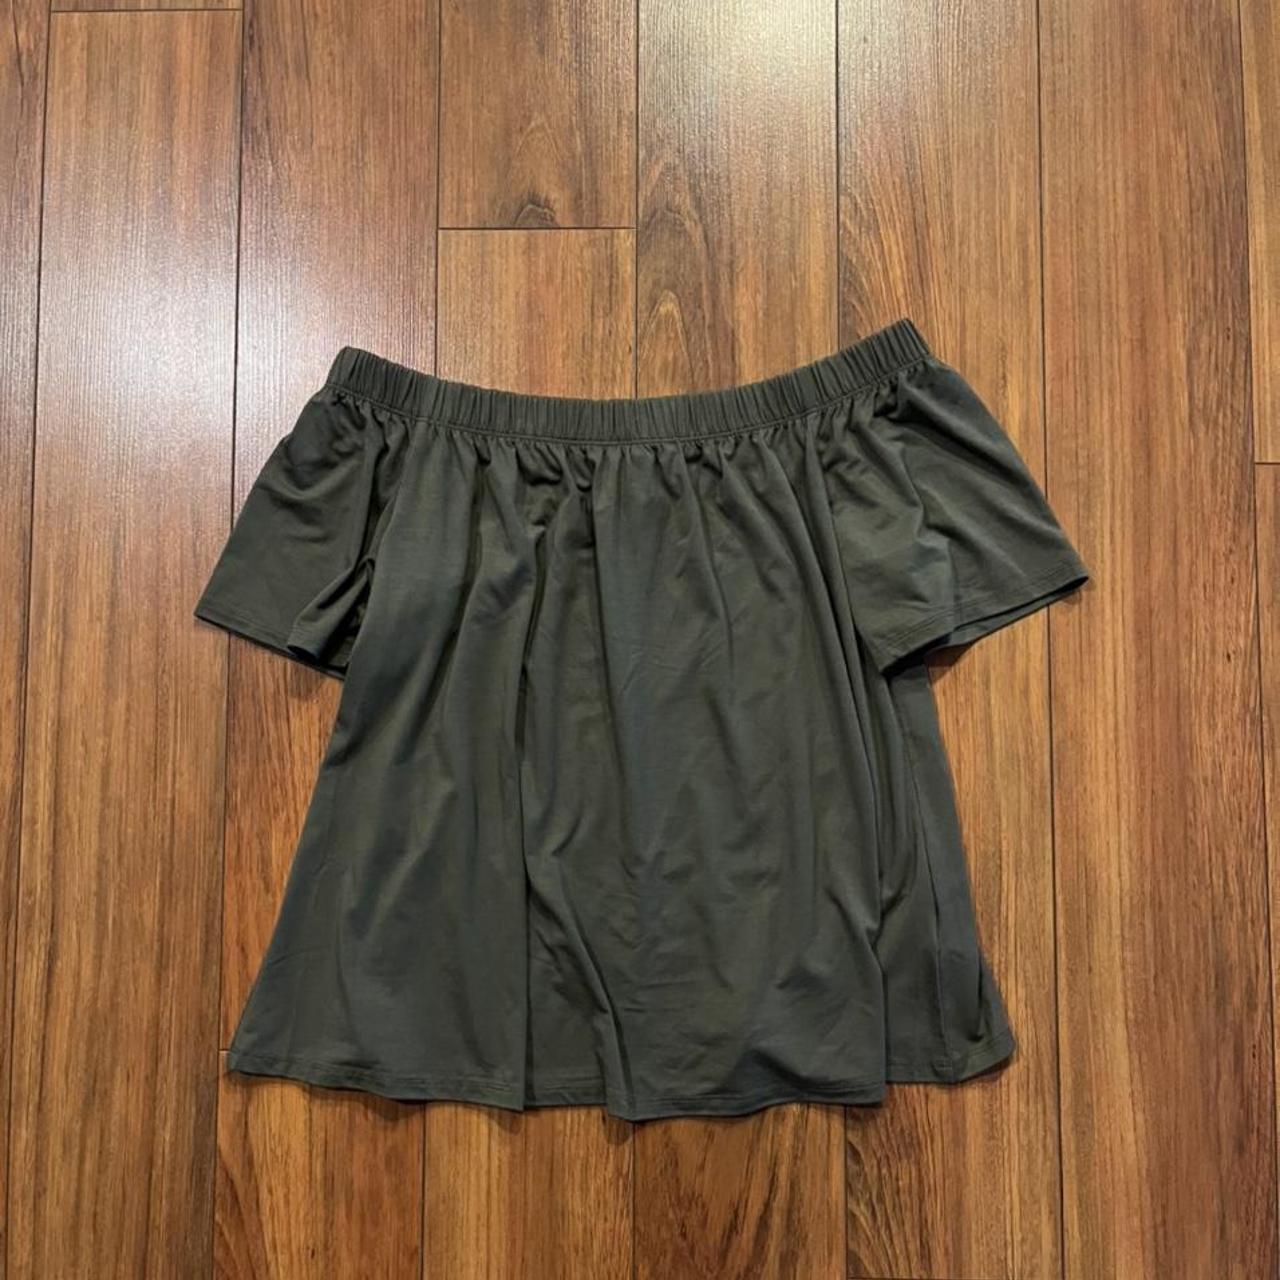 Product Image 1 - Off-the-shoulder green top. Size x-small.